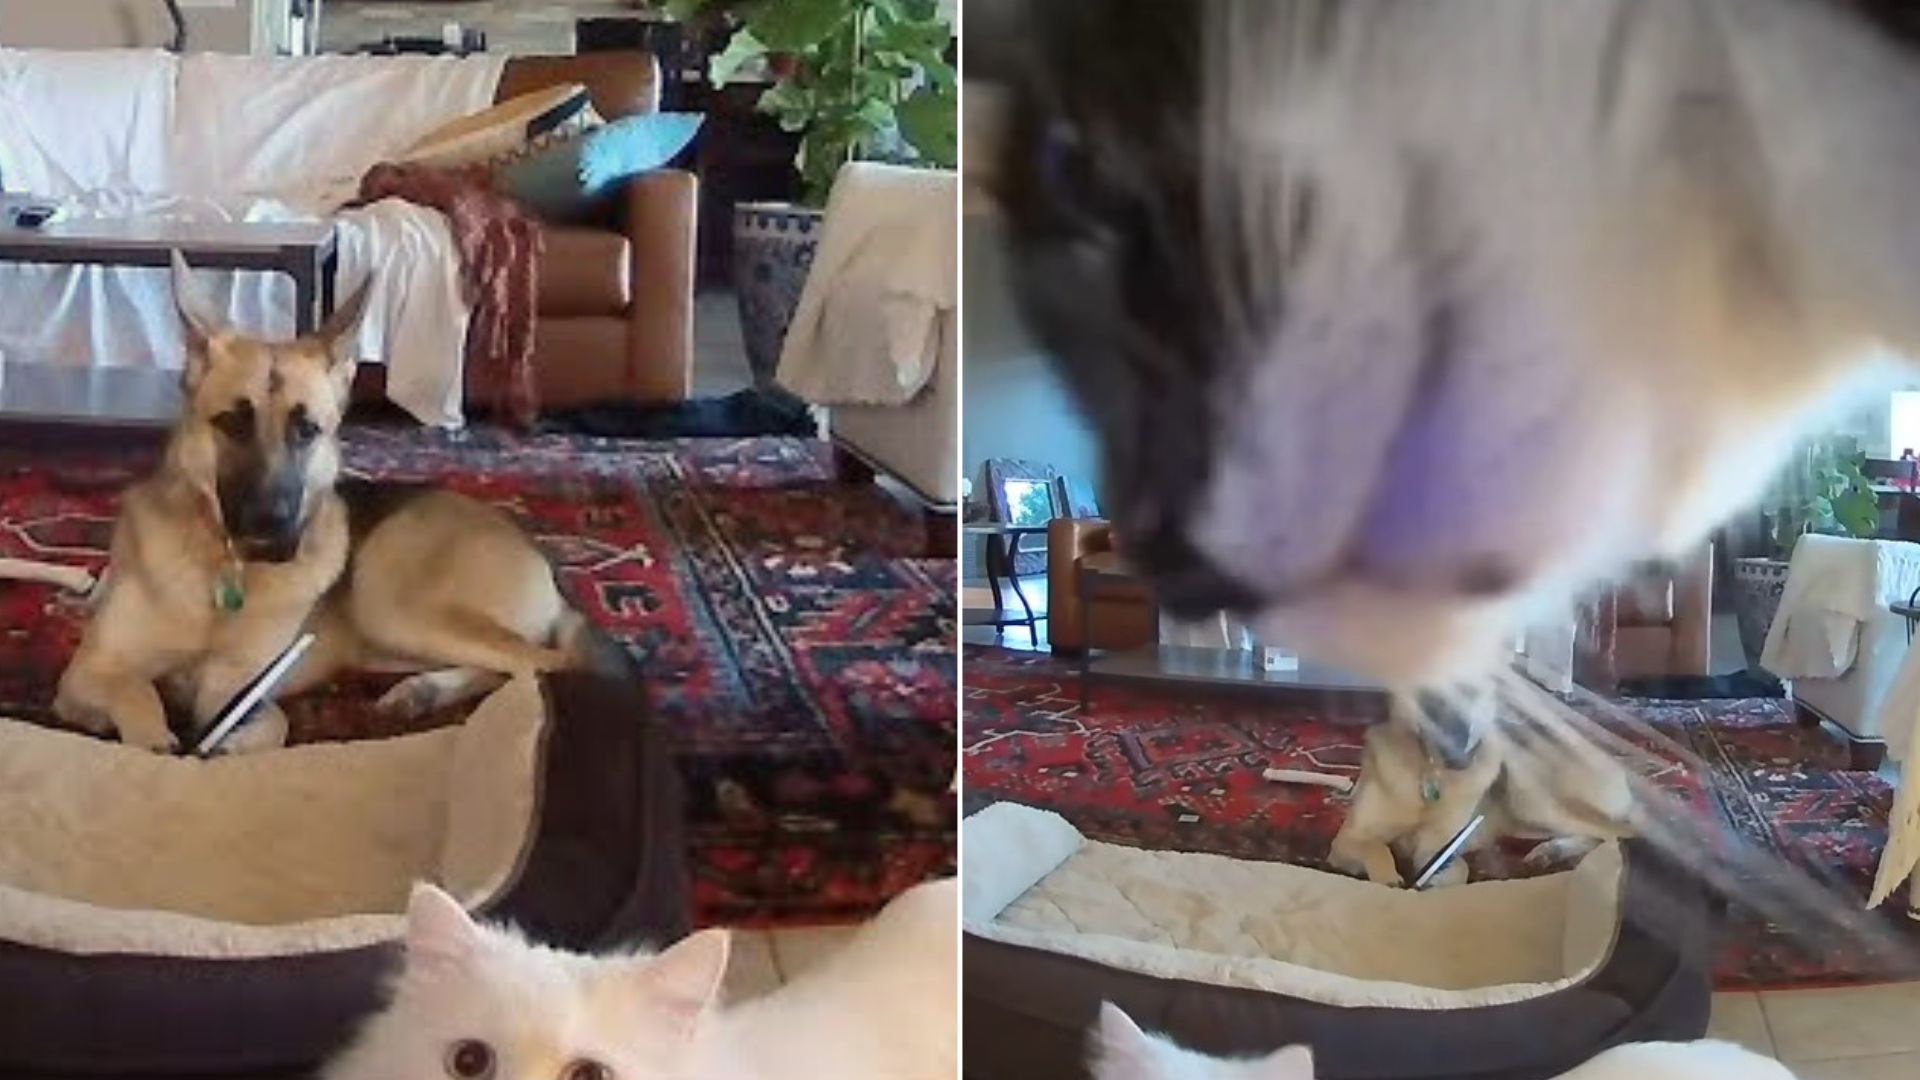 Camera Caught This Dog Chewing On A Picture But The Cat Came To Save The Day